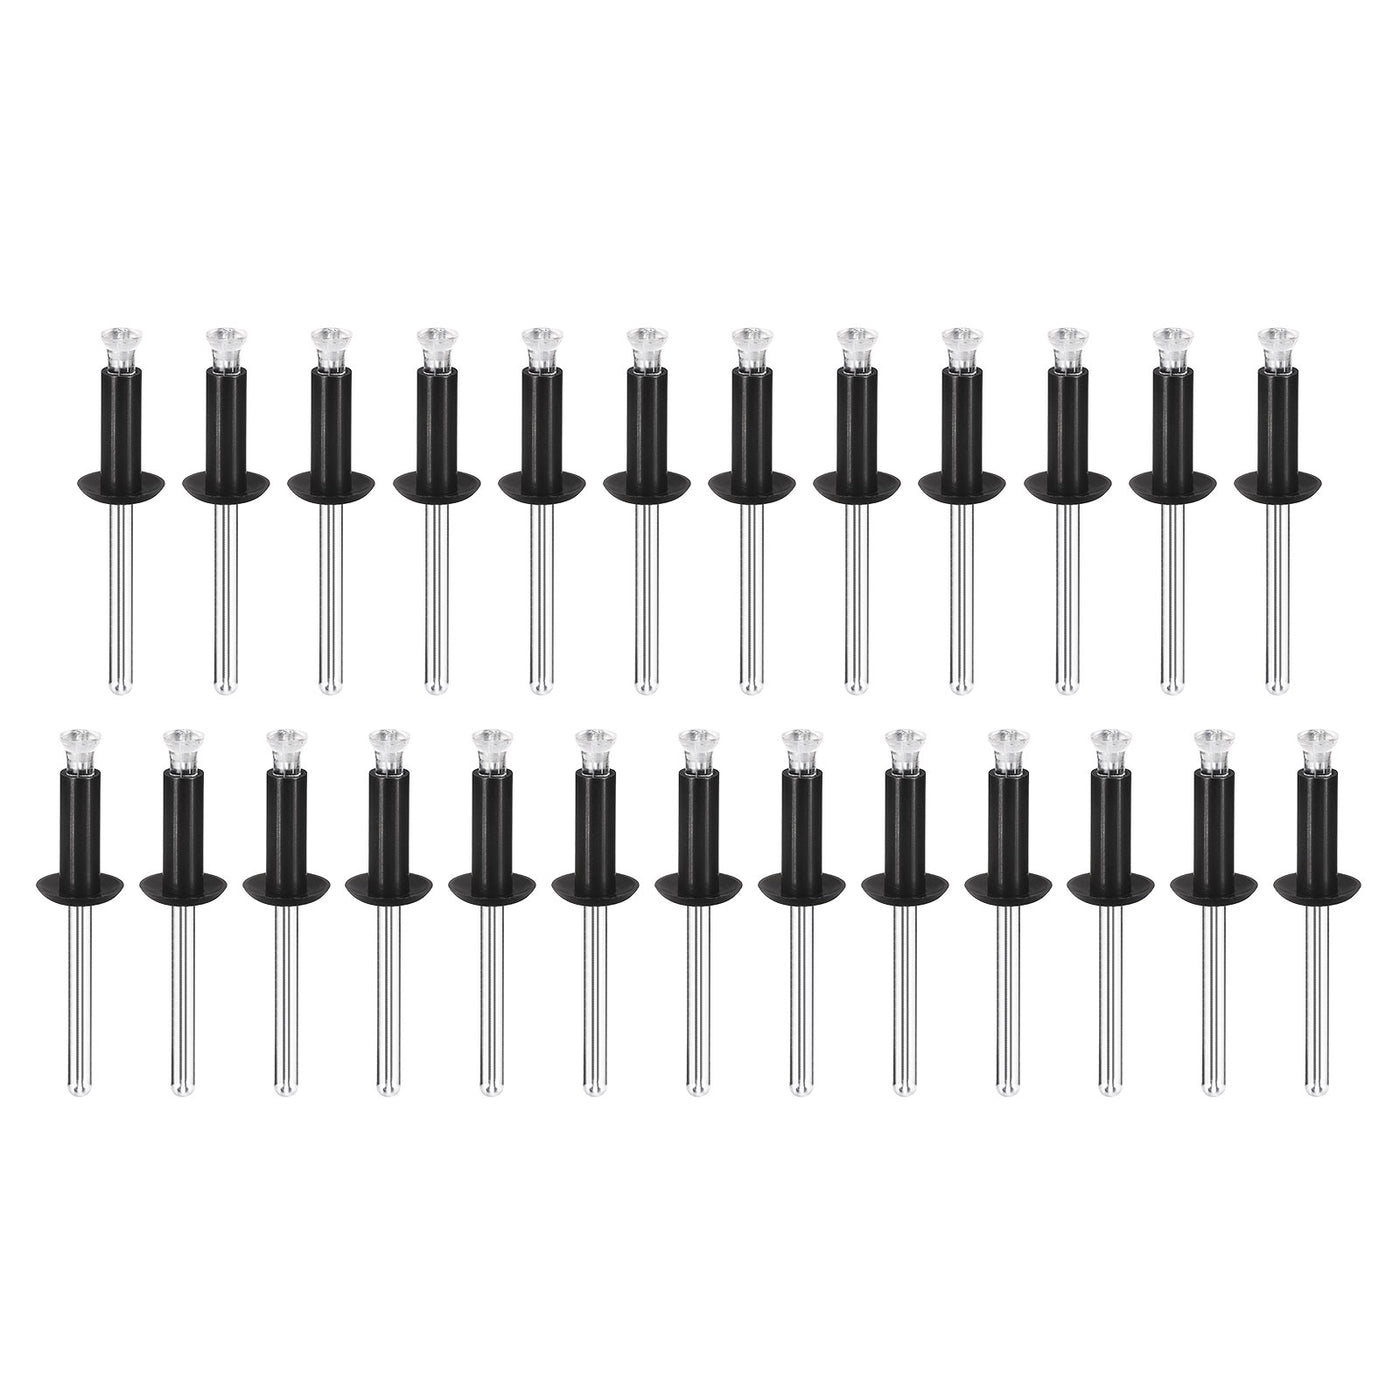 uxcell Uxcell 5.6mm x 15.9mm Nylon Blind Rivets for PC Board Bumper Trim Retainer, Black 50Pcs